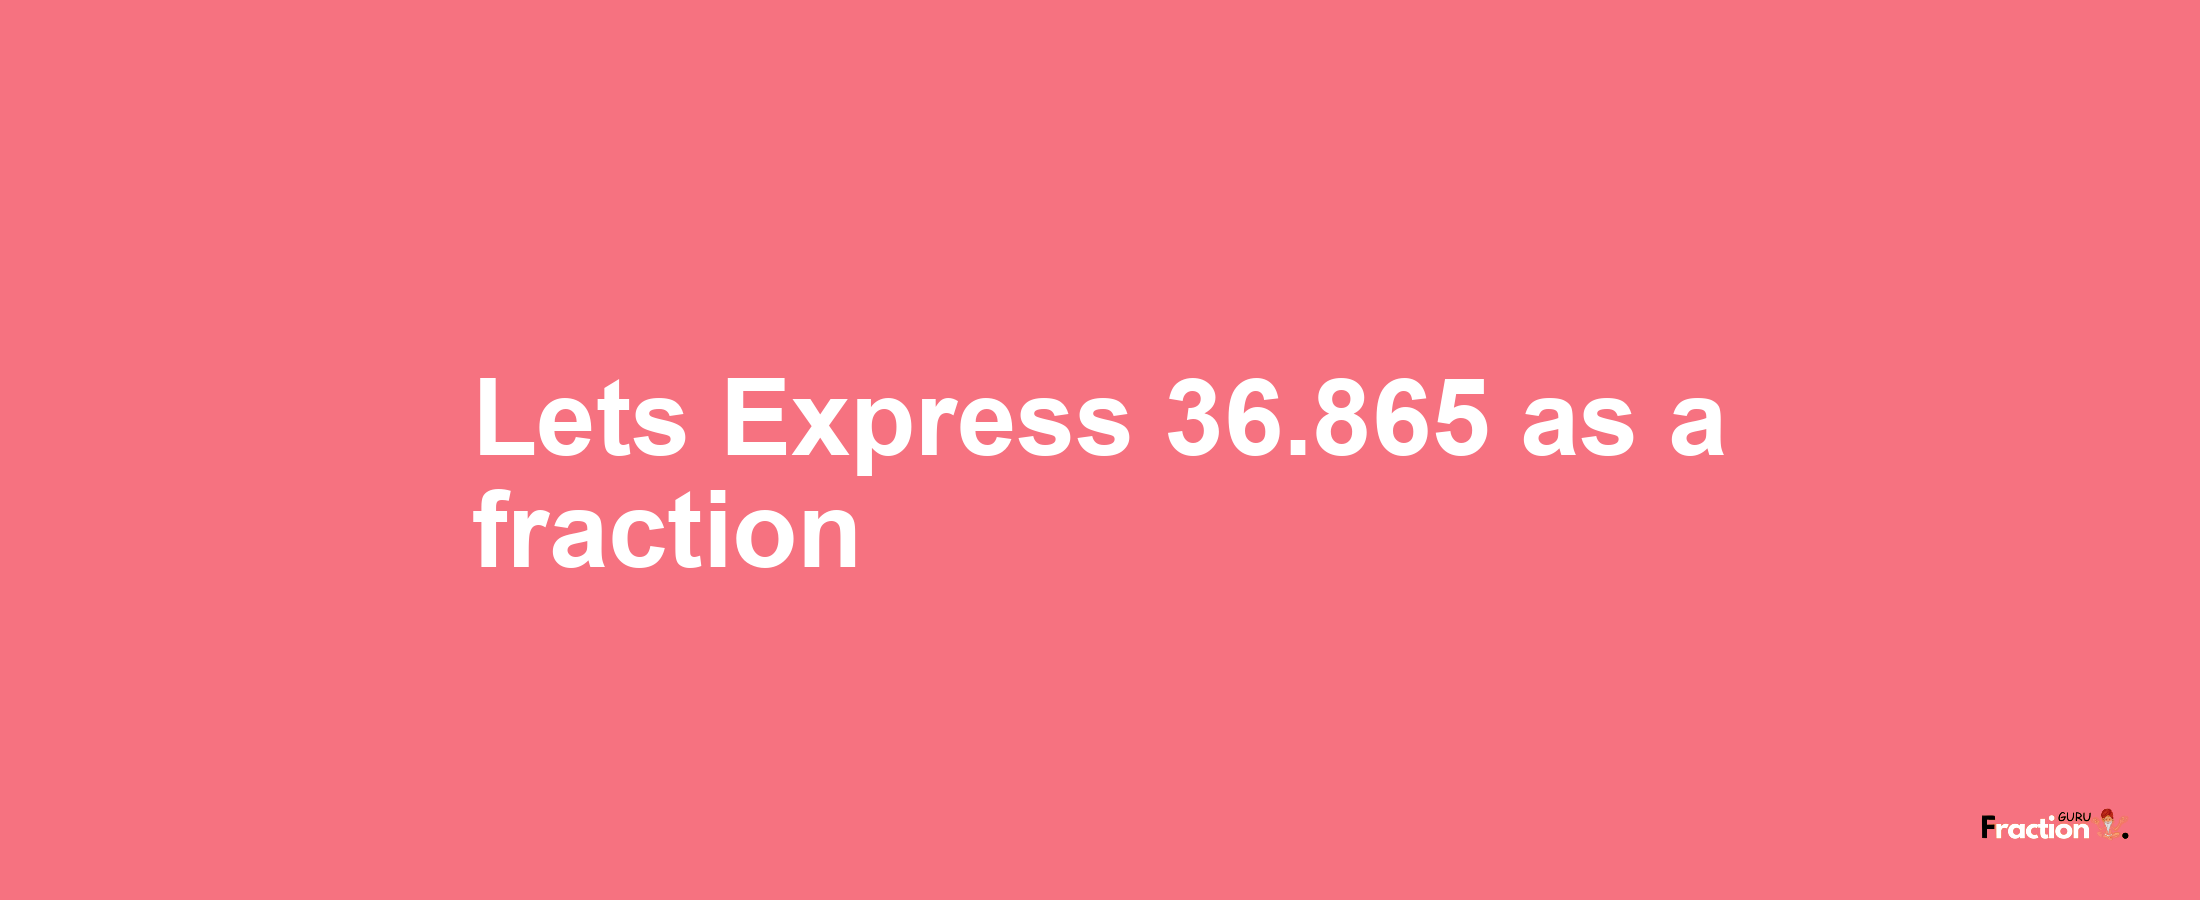 Lets Express 36.865 as afraction